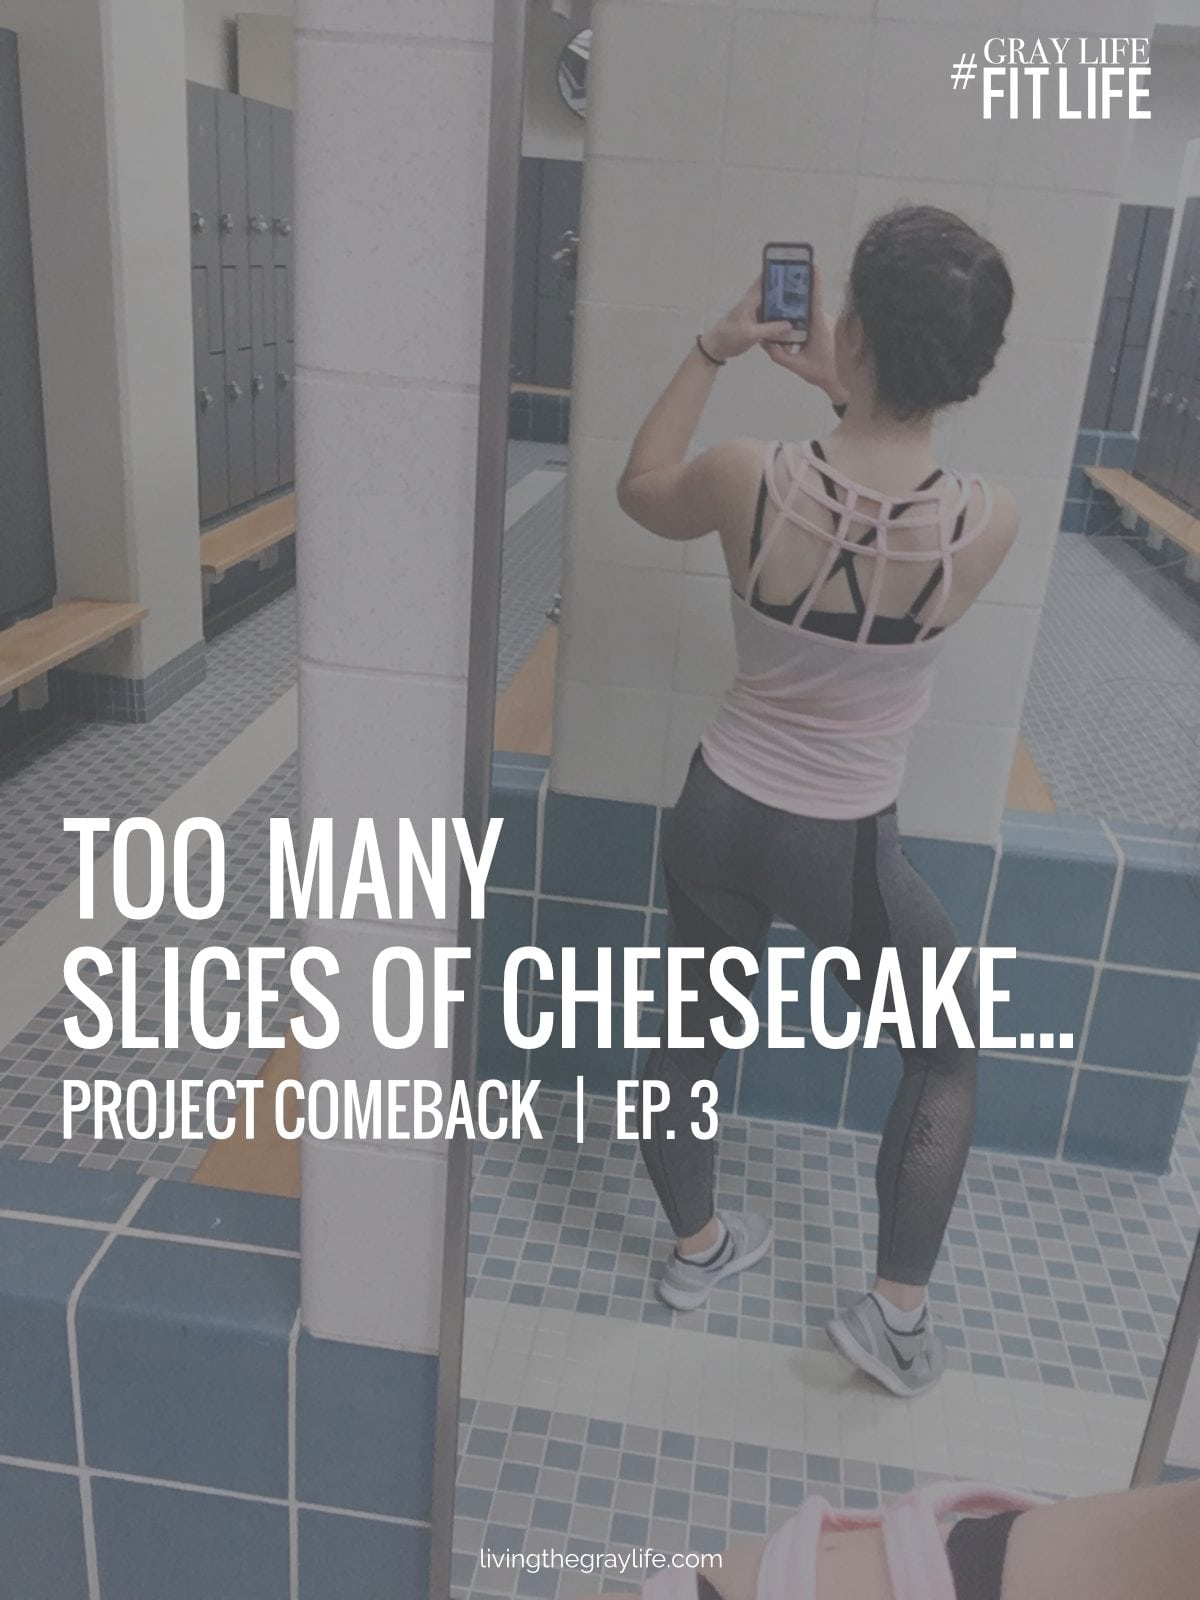 Too Many Slices of Cheesecake | Project Comeback Ep. 3